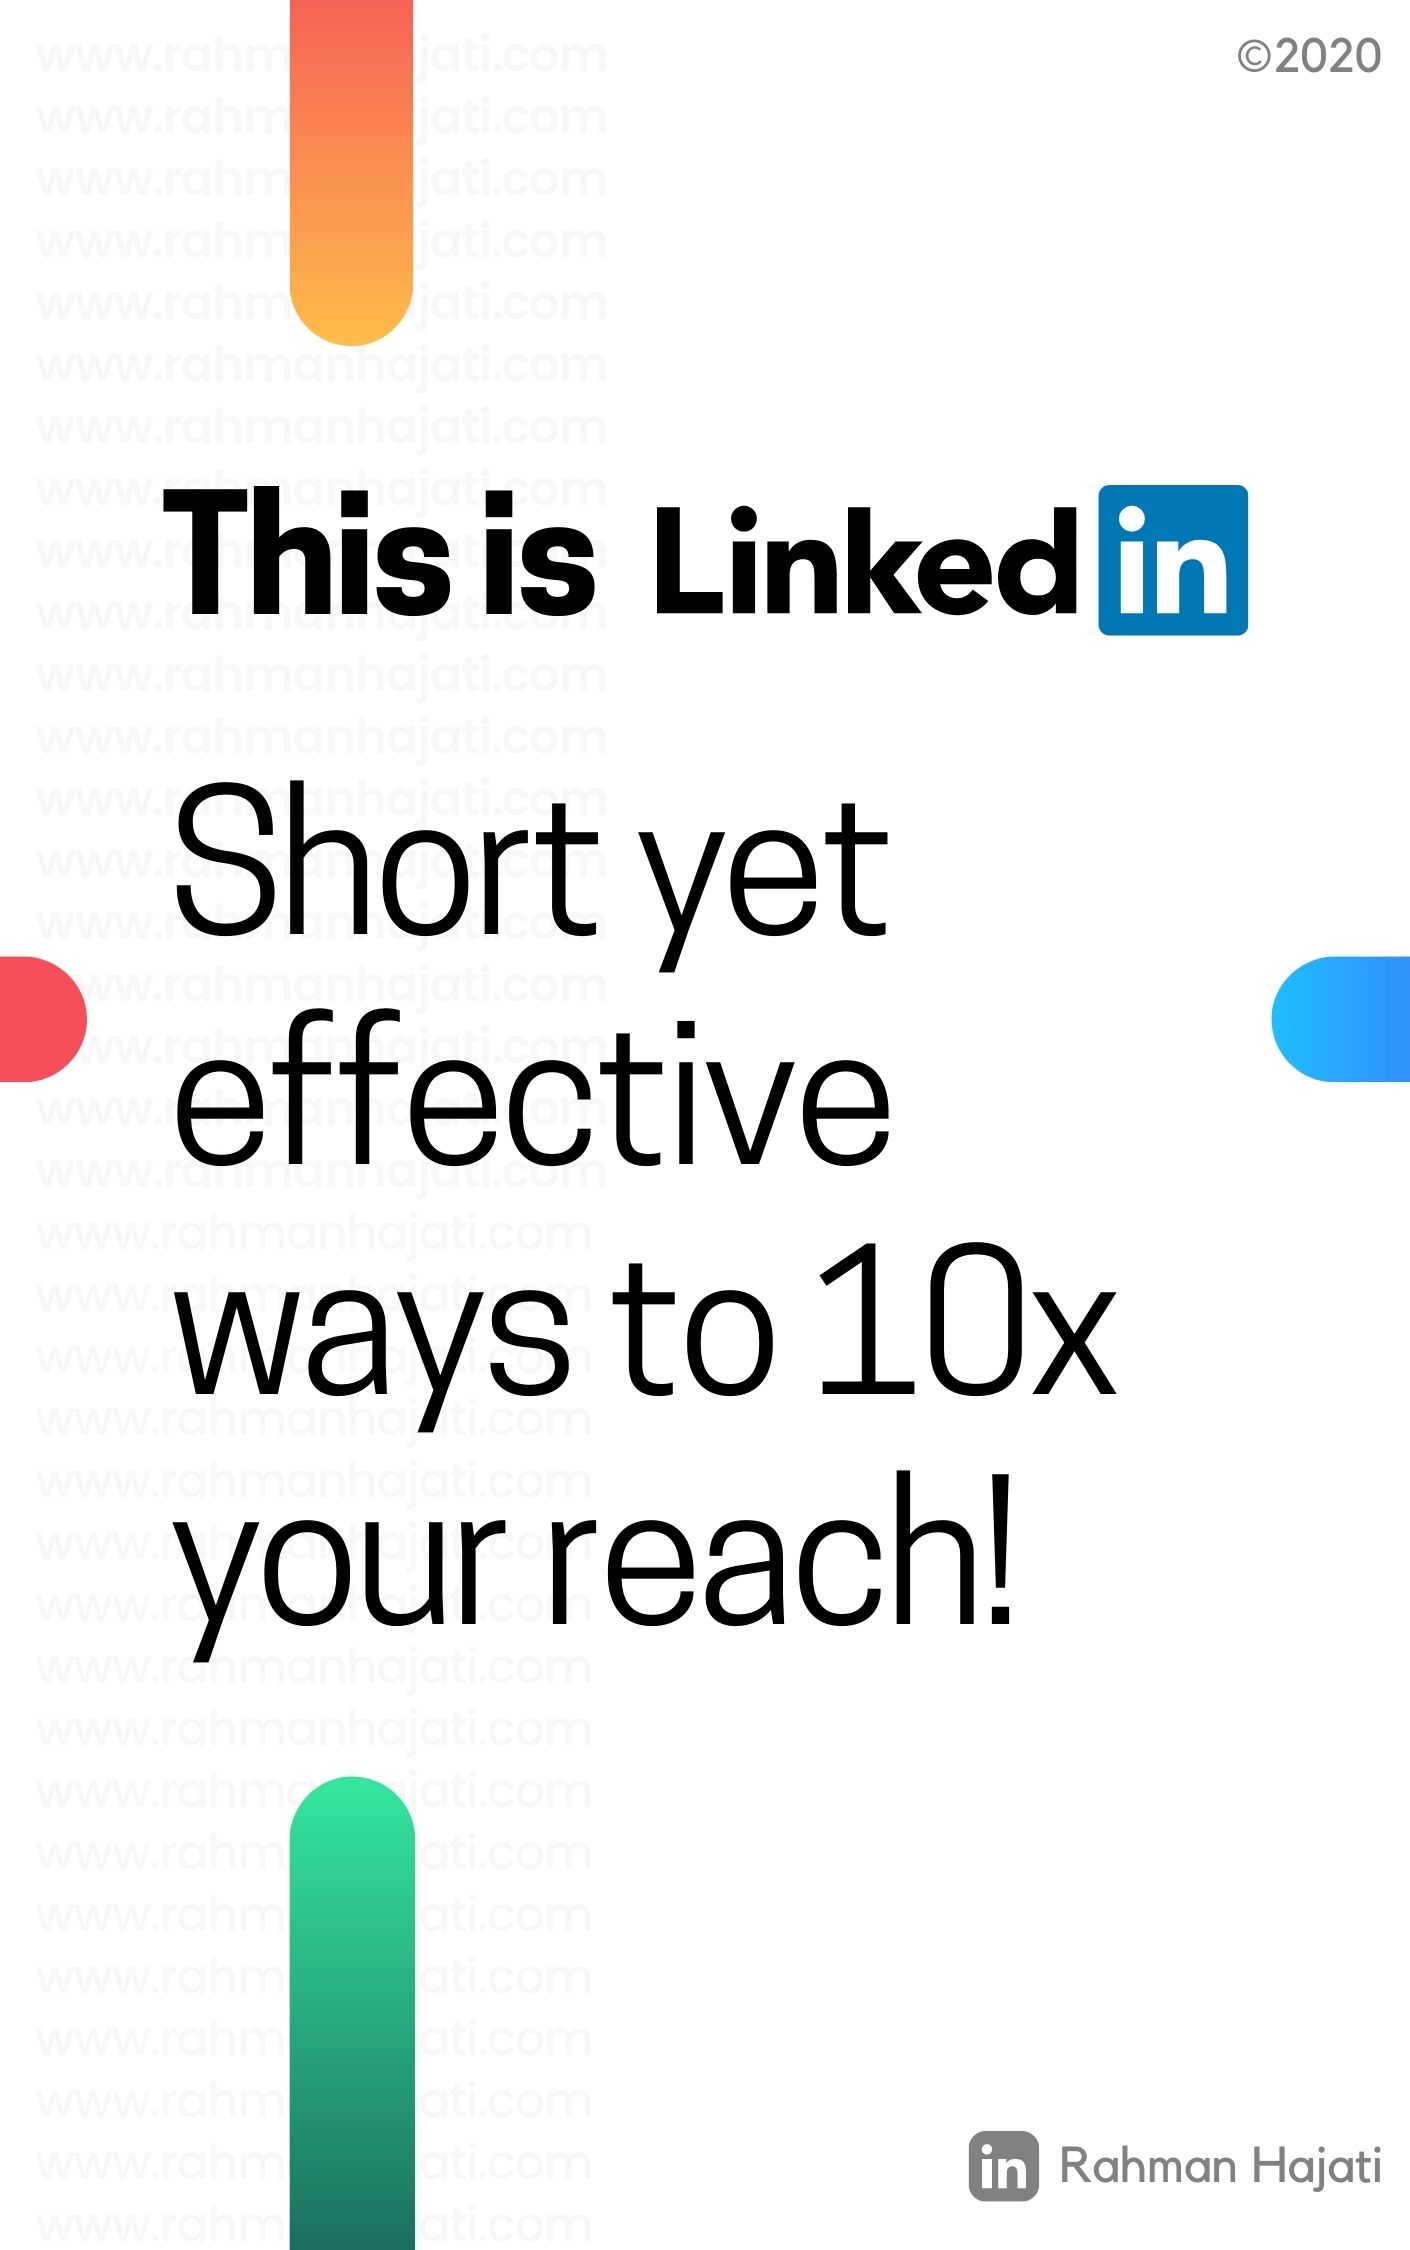 FREE: This is LinkedIn: 10x Growth on LinkedIn For Professionals & Personal Brands by Rahman Hajati